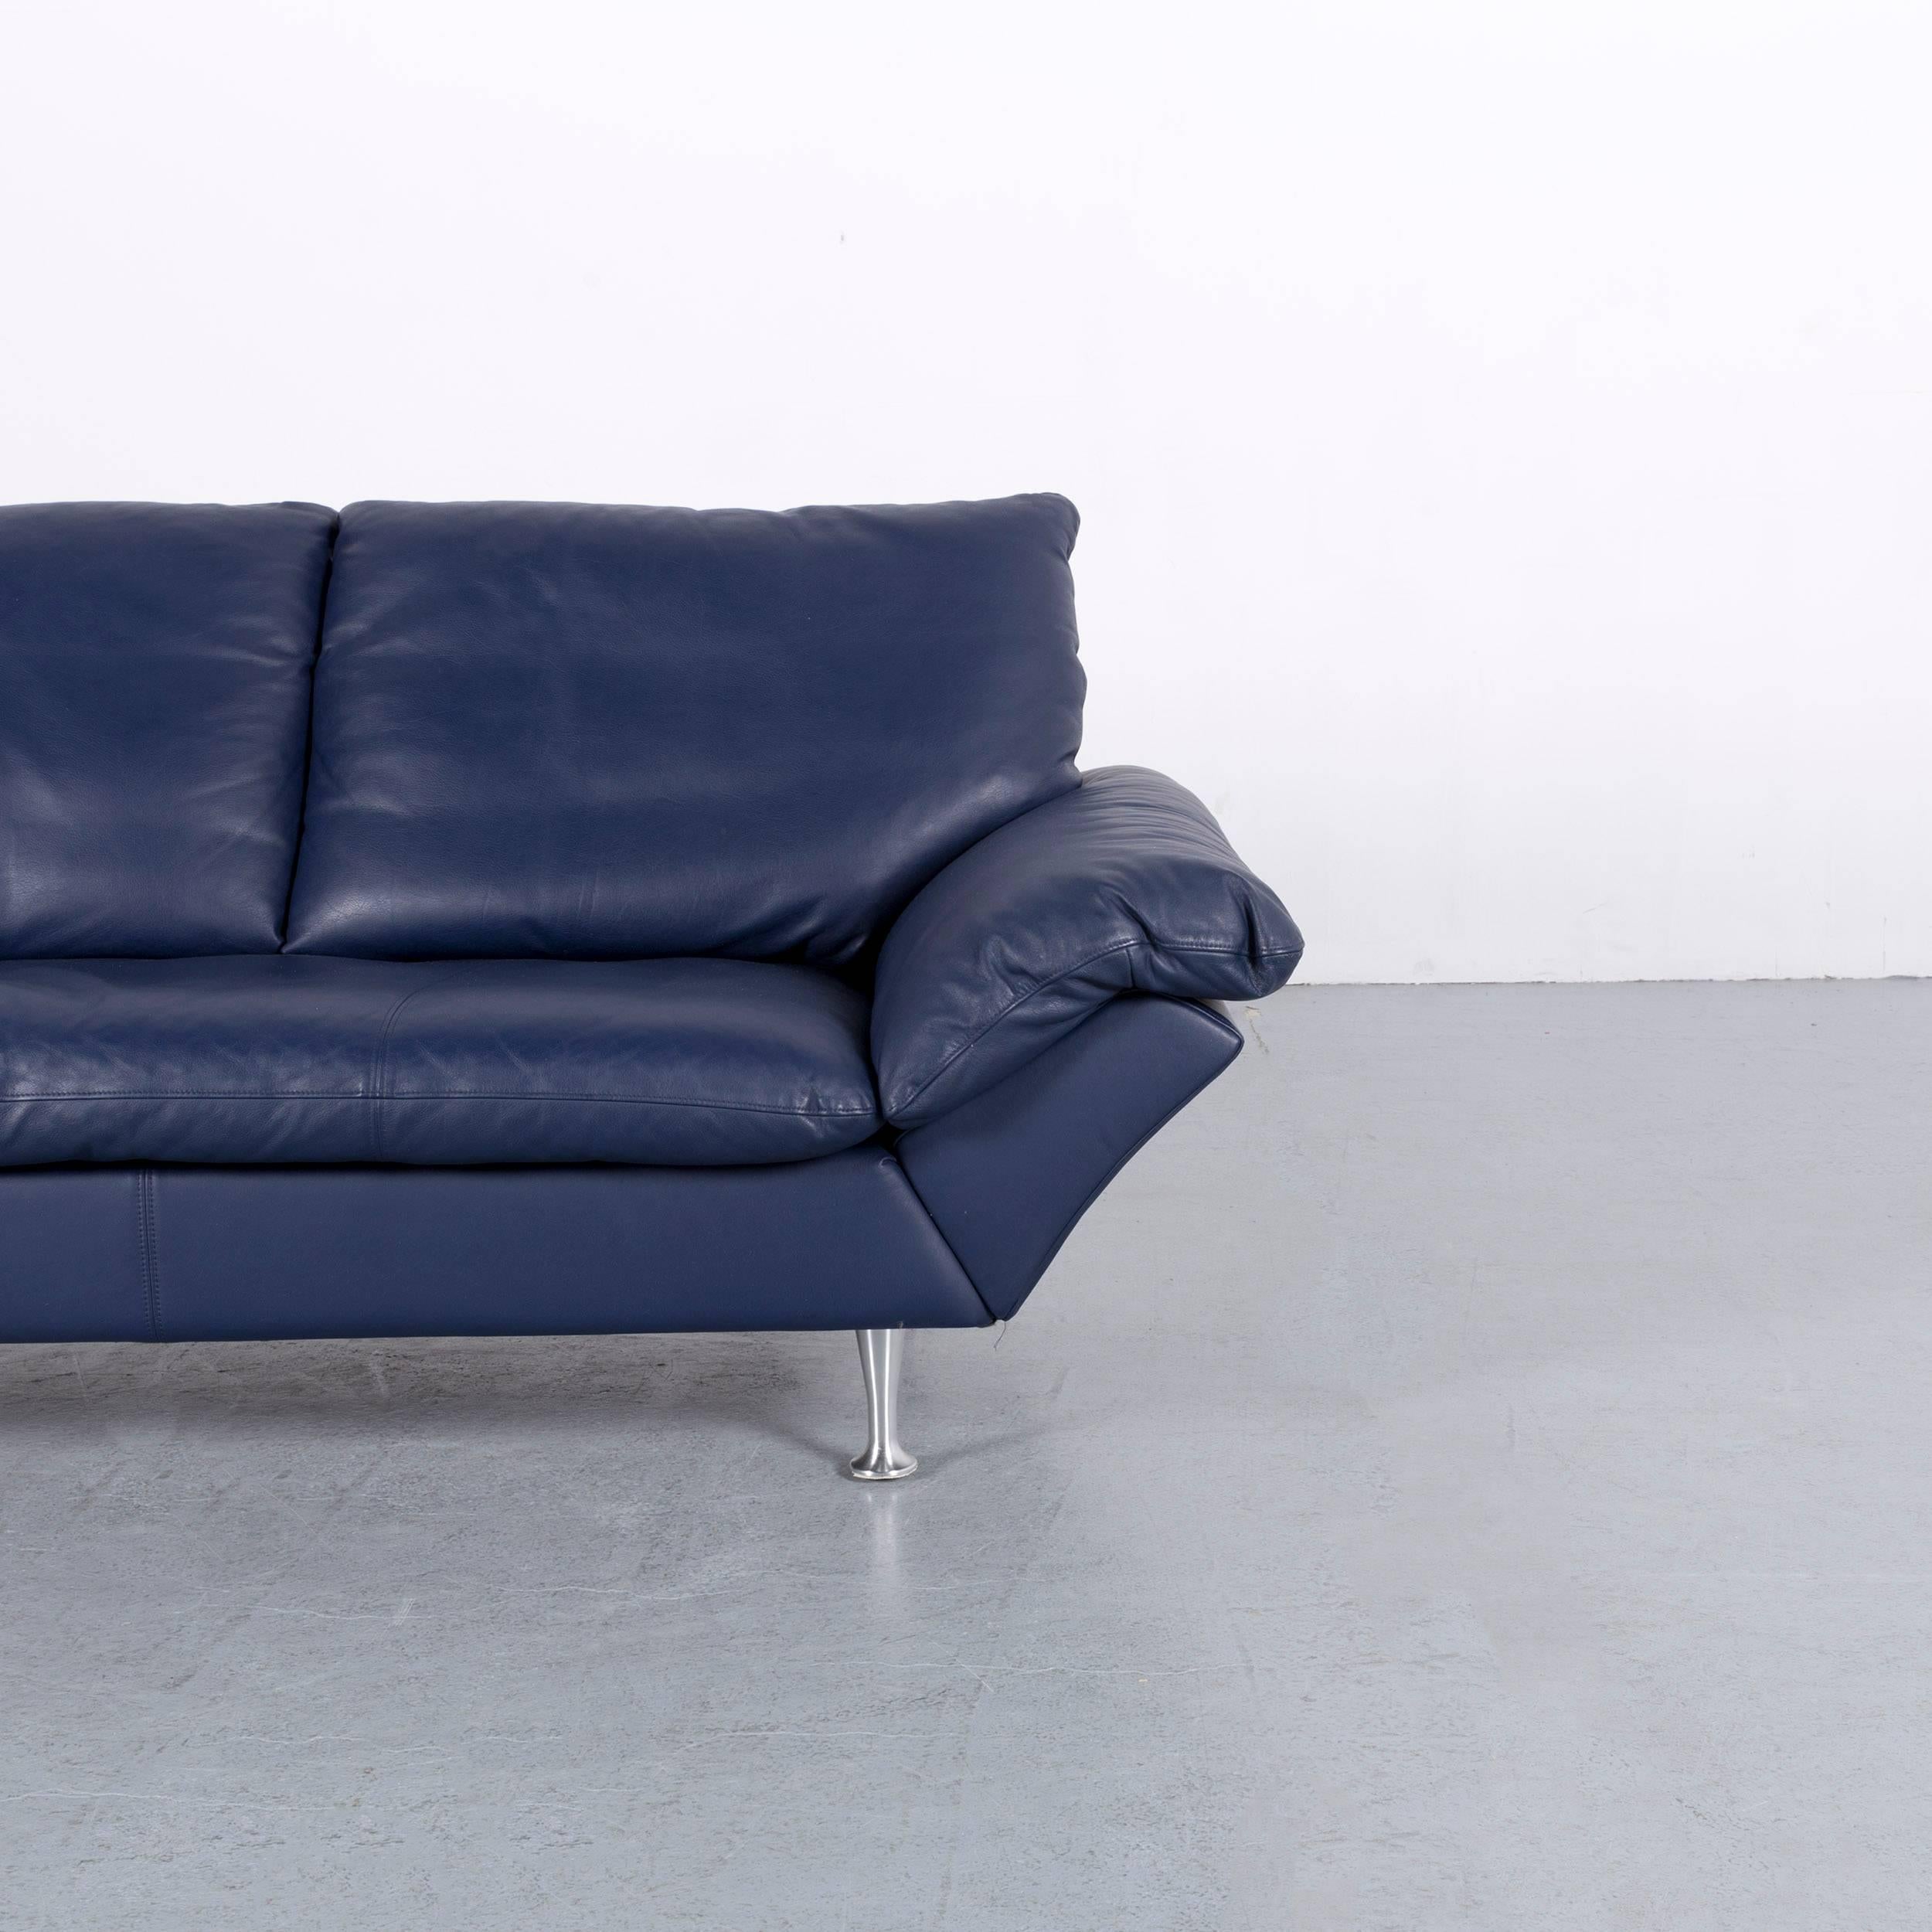 German Rolf Benz Designer Sofa Leather Blue Two-Seat Couch